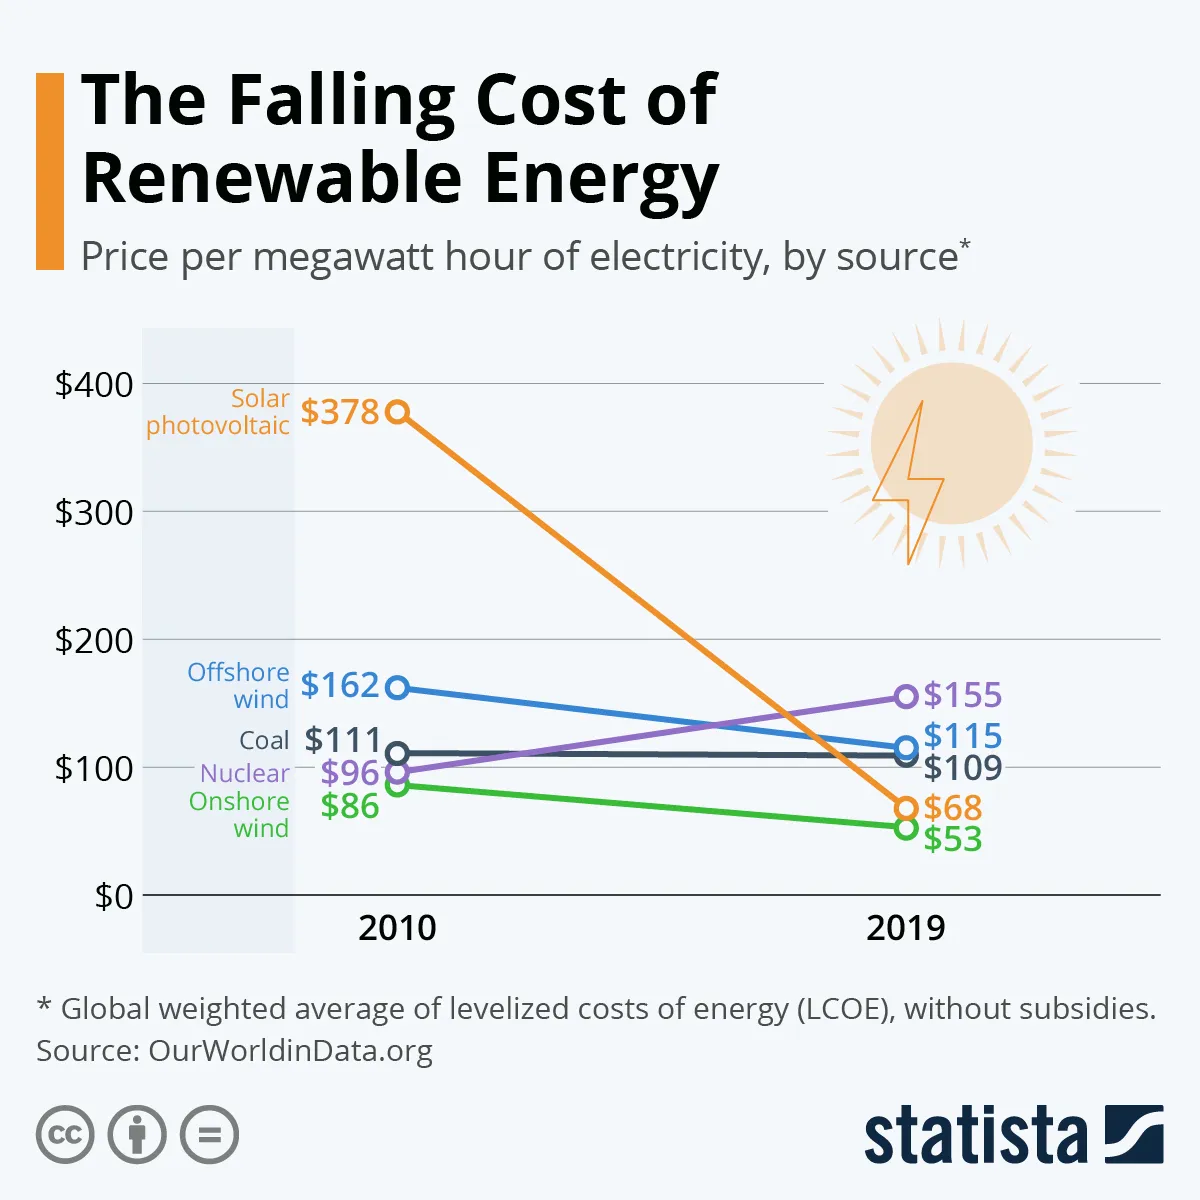 Line chart showing the falling costs of solar power and wind energy